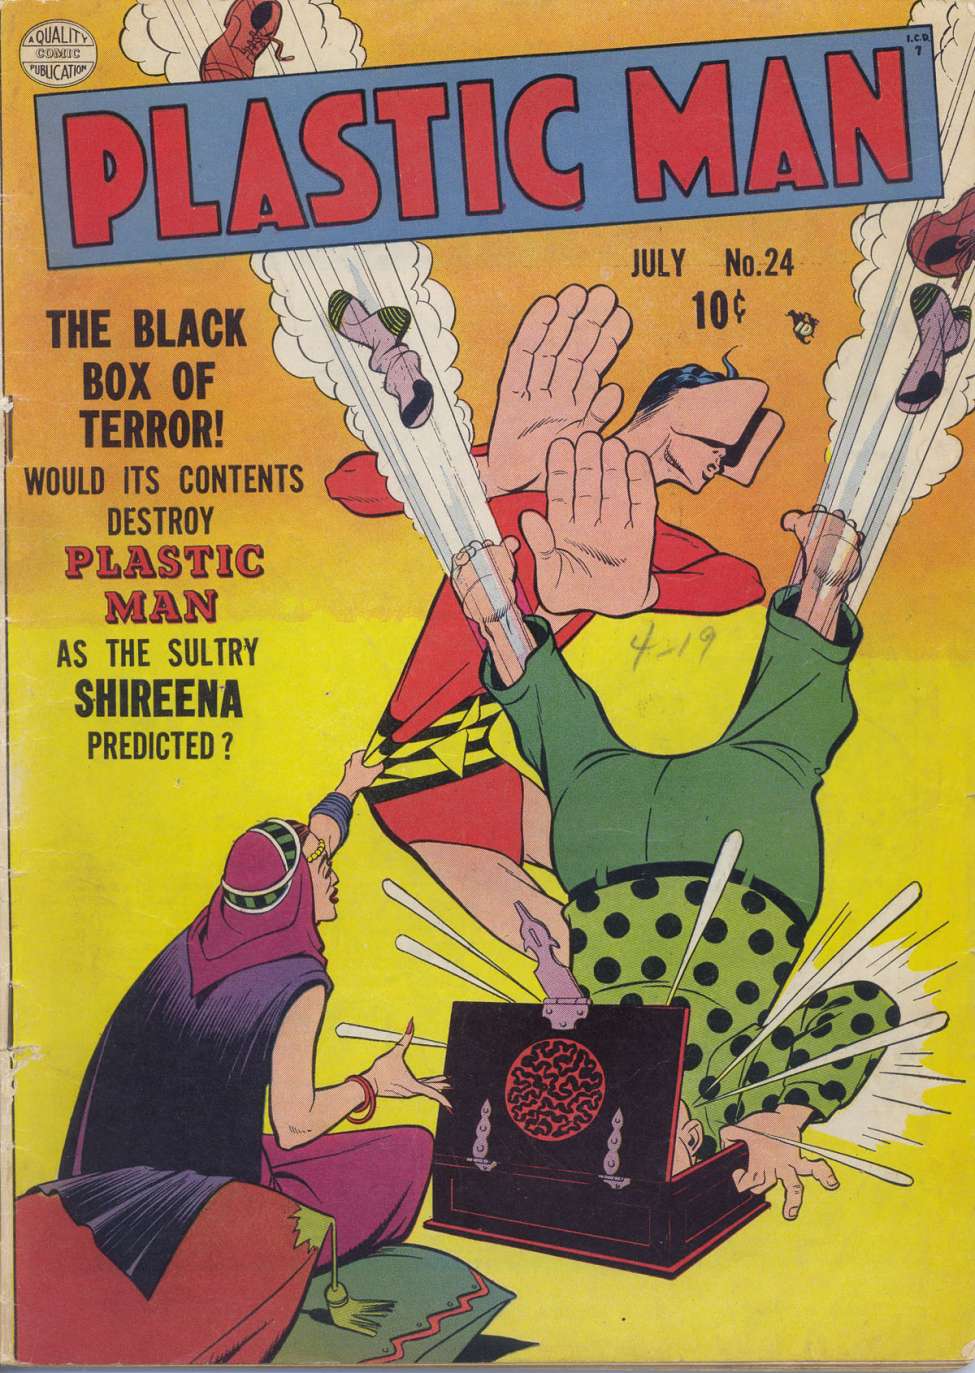 Book Cover For Plastic Man 24